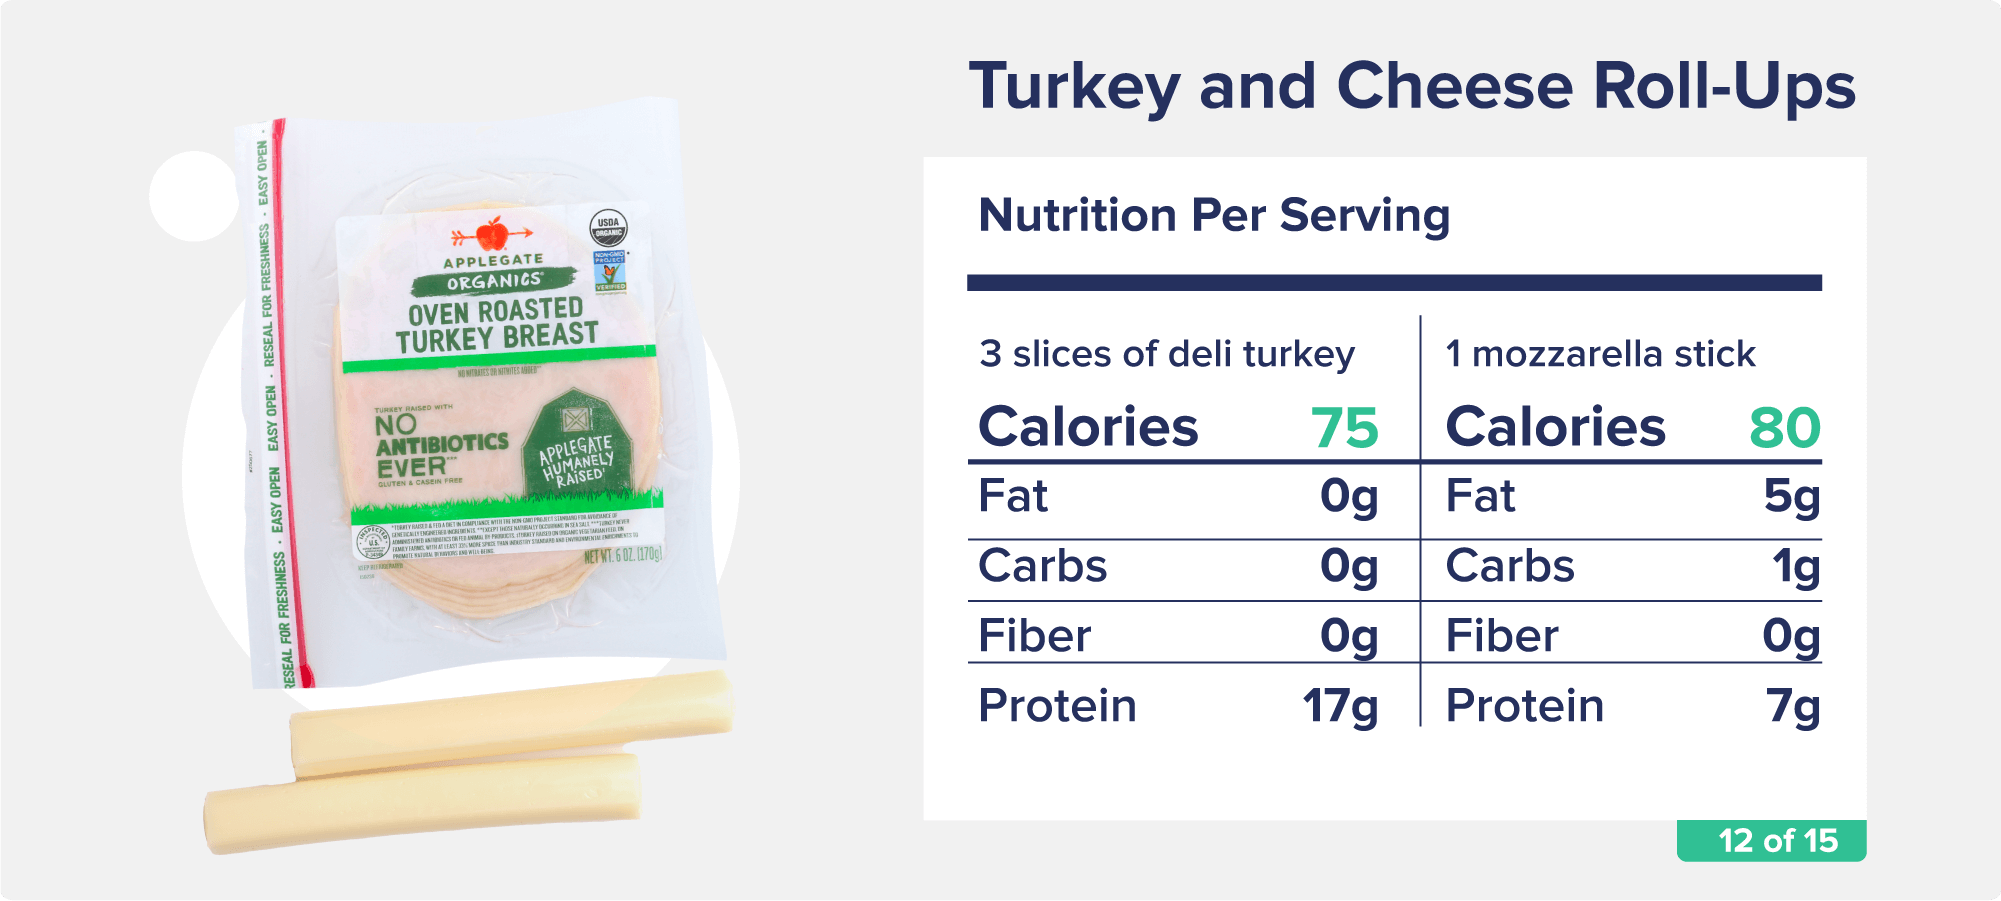 A package of Applegate Organic Oven Roasted Turkey Breast and two unwrapped cheese sticks, along with accompanying nutrition facts like calories, fat, and protein.